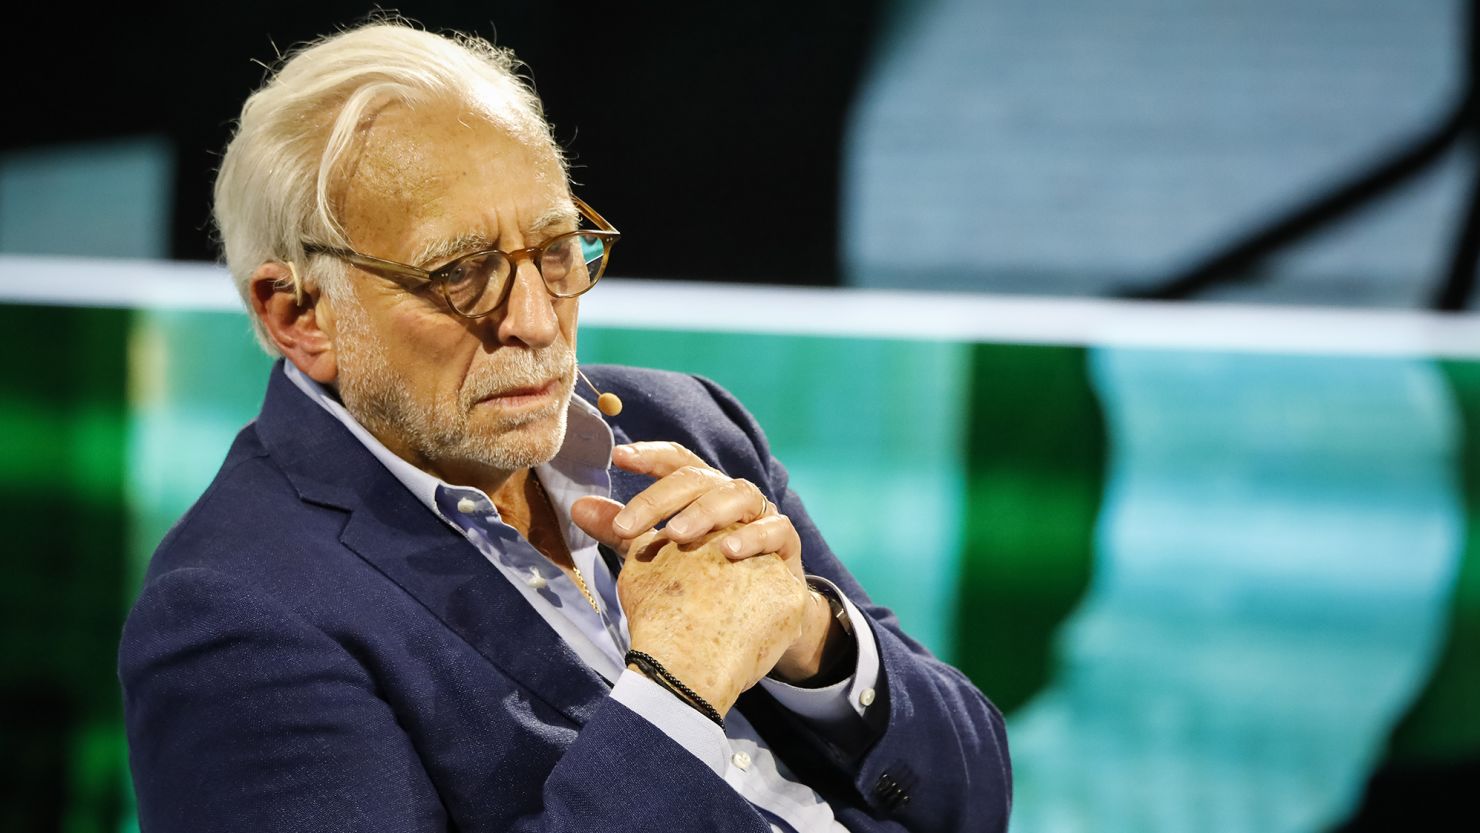 Nelson Peltz, founder and chief executive officer of Trian Fund Management, during the Future Investment Initiative (FII) Institute Priority Summit in Miami, Florida, US, on Thursday, March 30, 2023.